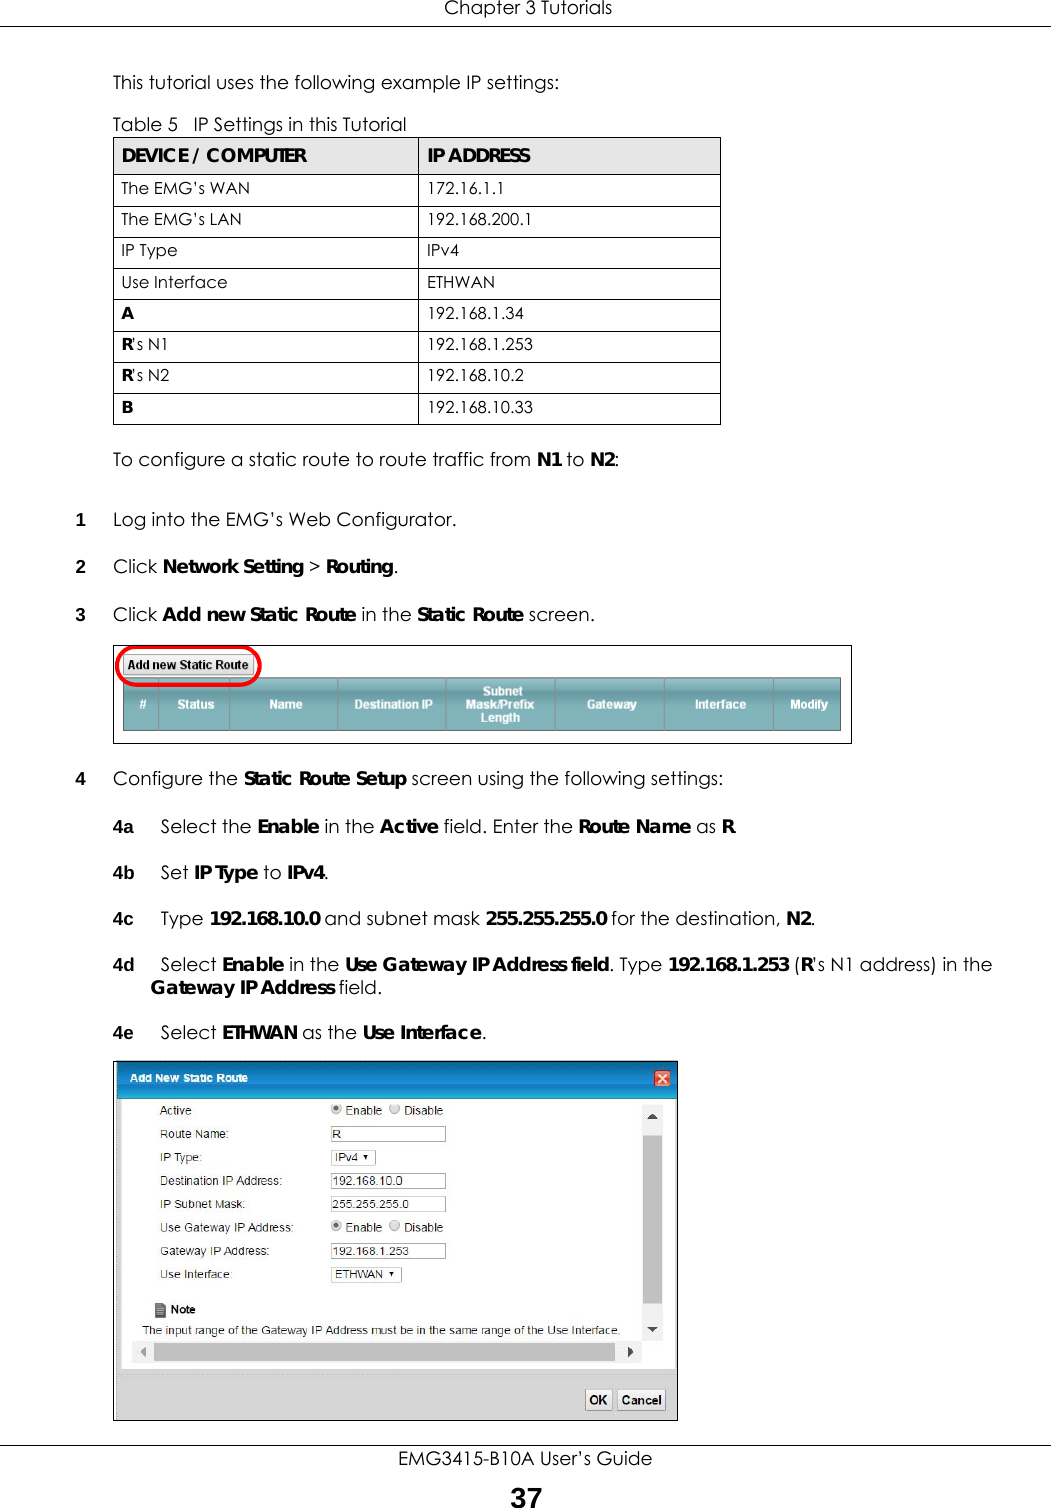  Chapter 3 TutorialsEMG3415-B10A User’s Guide37This tutorial uses the following example IP settings:To configure a static route to route traffic from N1 to N2:1Log into the EMG’s Web Configurator.2Click Network Setting &gt; Routing.3Click Add new Static Route in the Static Route screen.4Configure the Static Route Setup screen using the following settings:4a Select the Enable in the Active field. Enter the Route Name as R.4b Set IP Type to IPv4. 4c Type 192.168.10.0 and subnet mask 255.255.255.0 for the destination, N2.4d Select Enable in the Use Gateway IP Address field. Type 192.168.1.253 (R’s N1 address) in the Gateway IP Address field.4e Select ETHWAN as the Use Interface.Table 5   IP Settings in this TutorialDEVICE / COMPUTER IP ADDRESSThe EMG’s WAN 172.16.1.1The EMG’s LAN 192.168.200.1IP Type IPv4Use Interface ETHWANA192.168.1.34R’s N1  192.168.1.253R’s N2  192.168.10.2B192.168.10.33